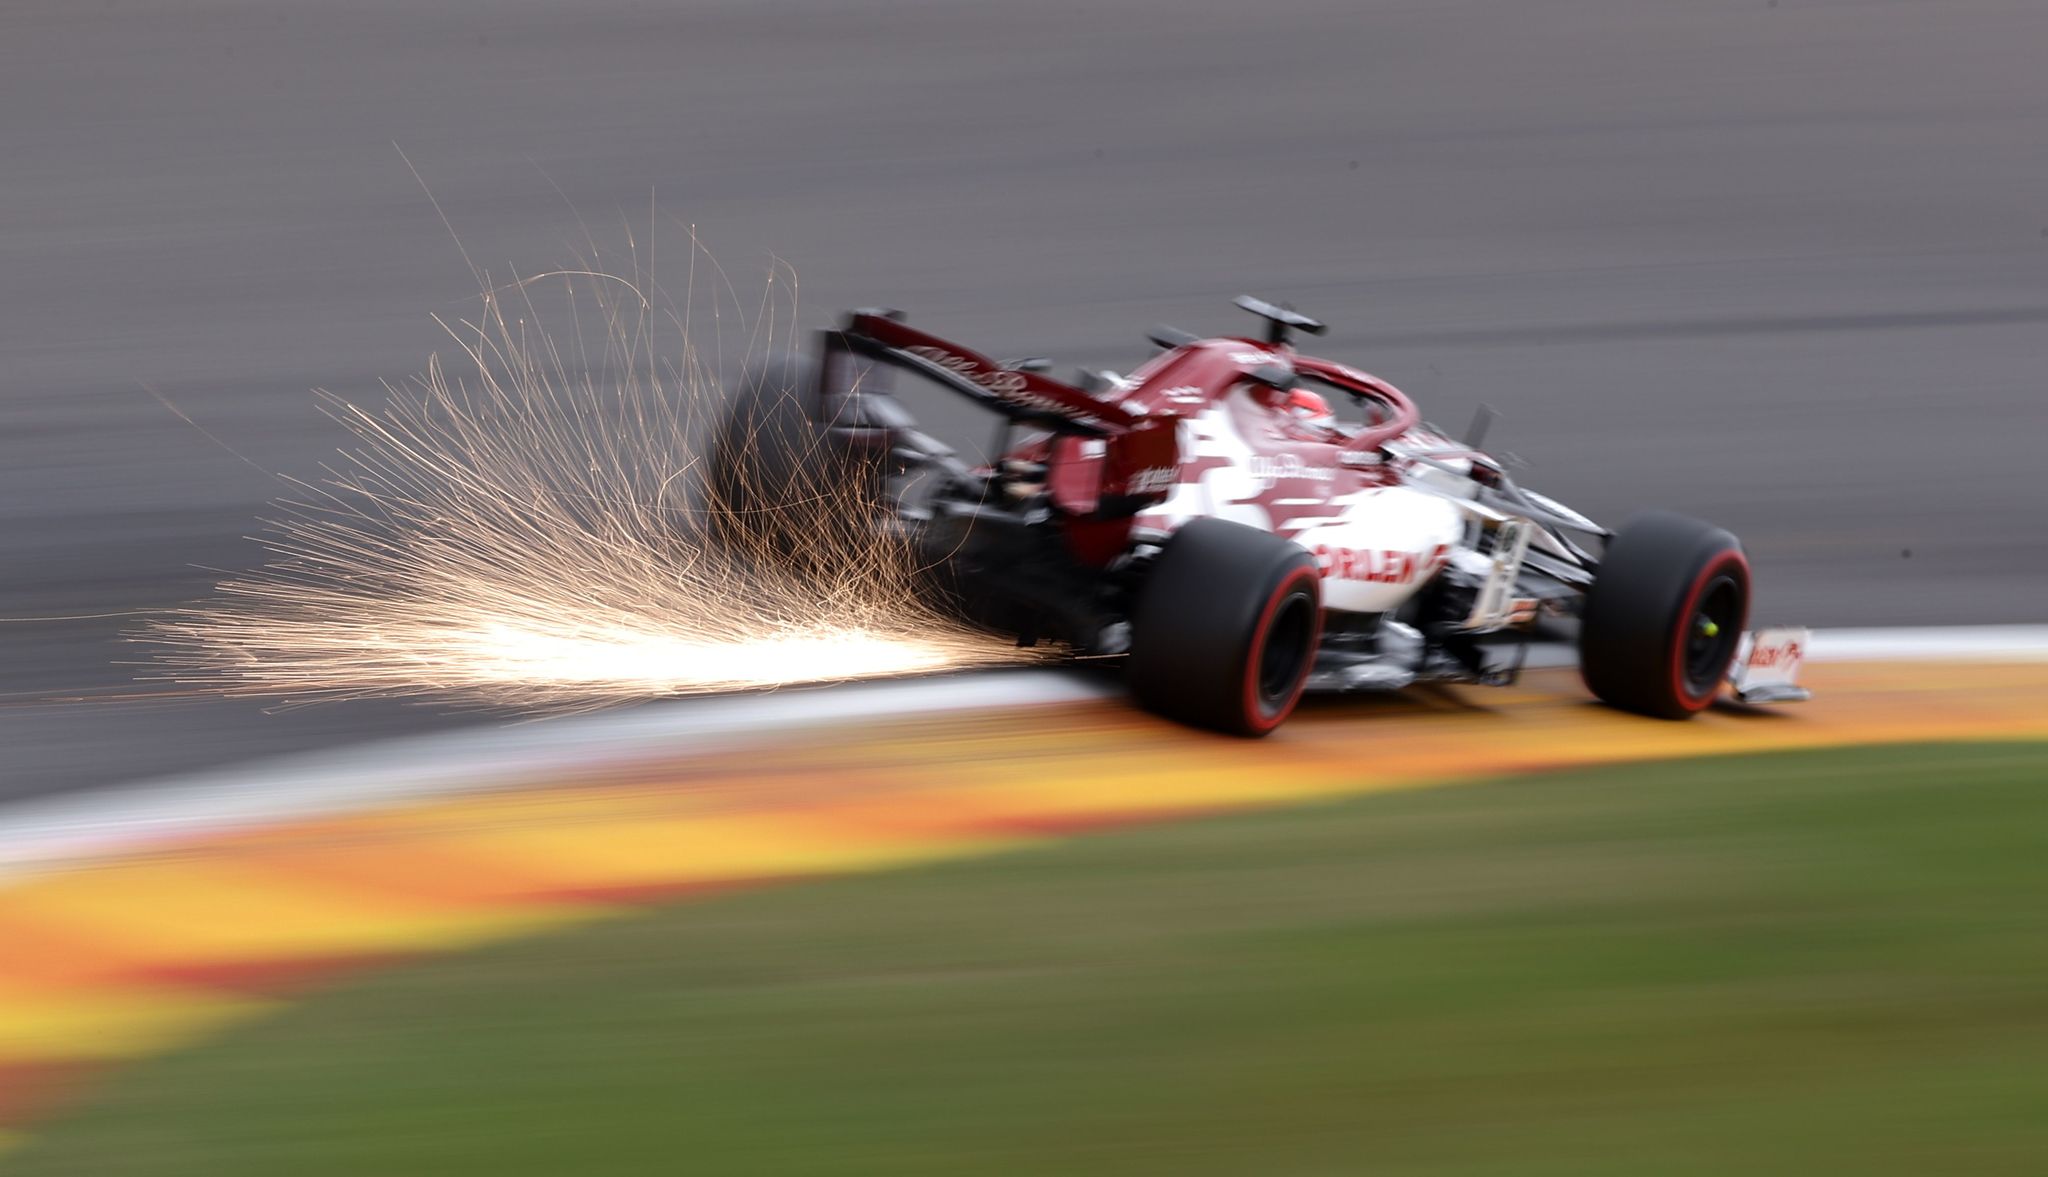 TOPSHOT - Alfa Romeos Finnish driver Kimi lt;HIT gt;Raikkonen lt;/HIT gt; during the first practice session at the Spa-Francorchamps circuit in Spa on August 28, 2020 ahead of the Belgian Formula One Grand Prix. (Photo by Lars Baron / AFP)